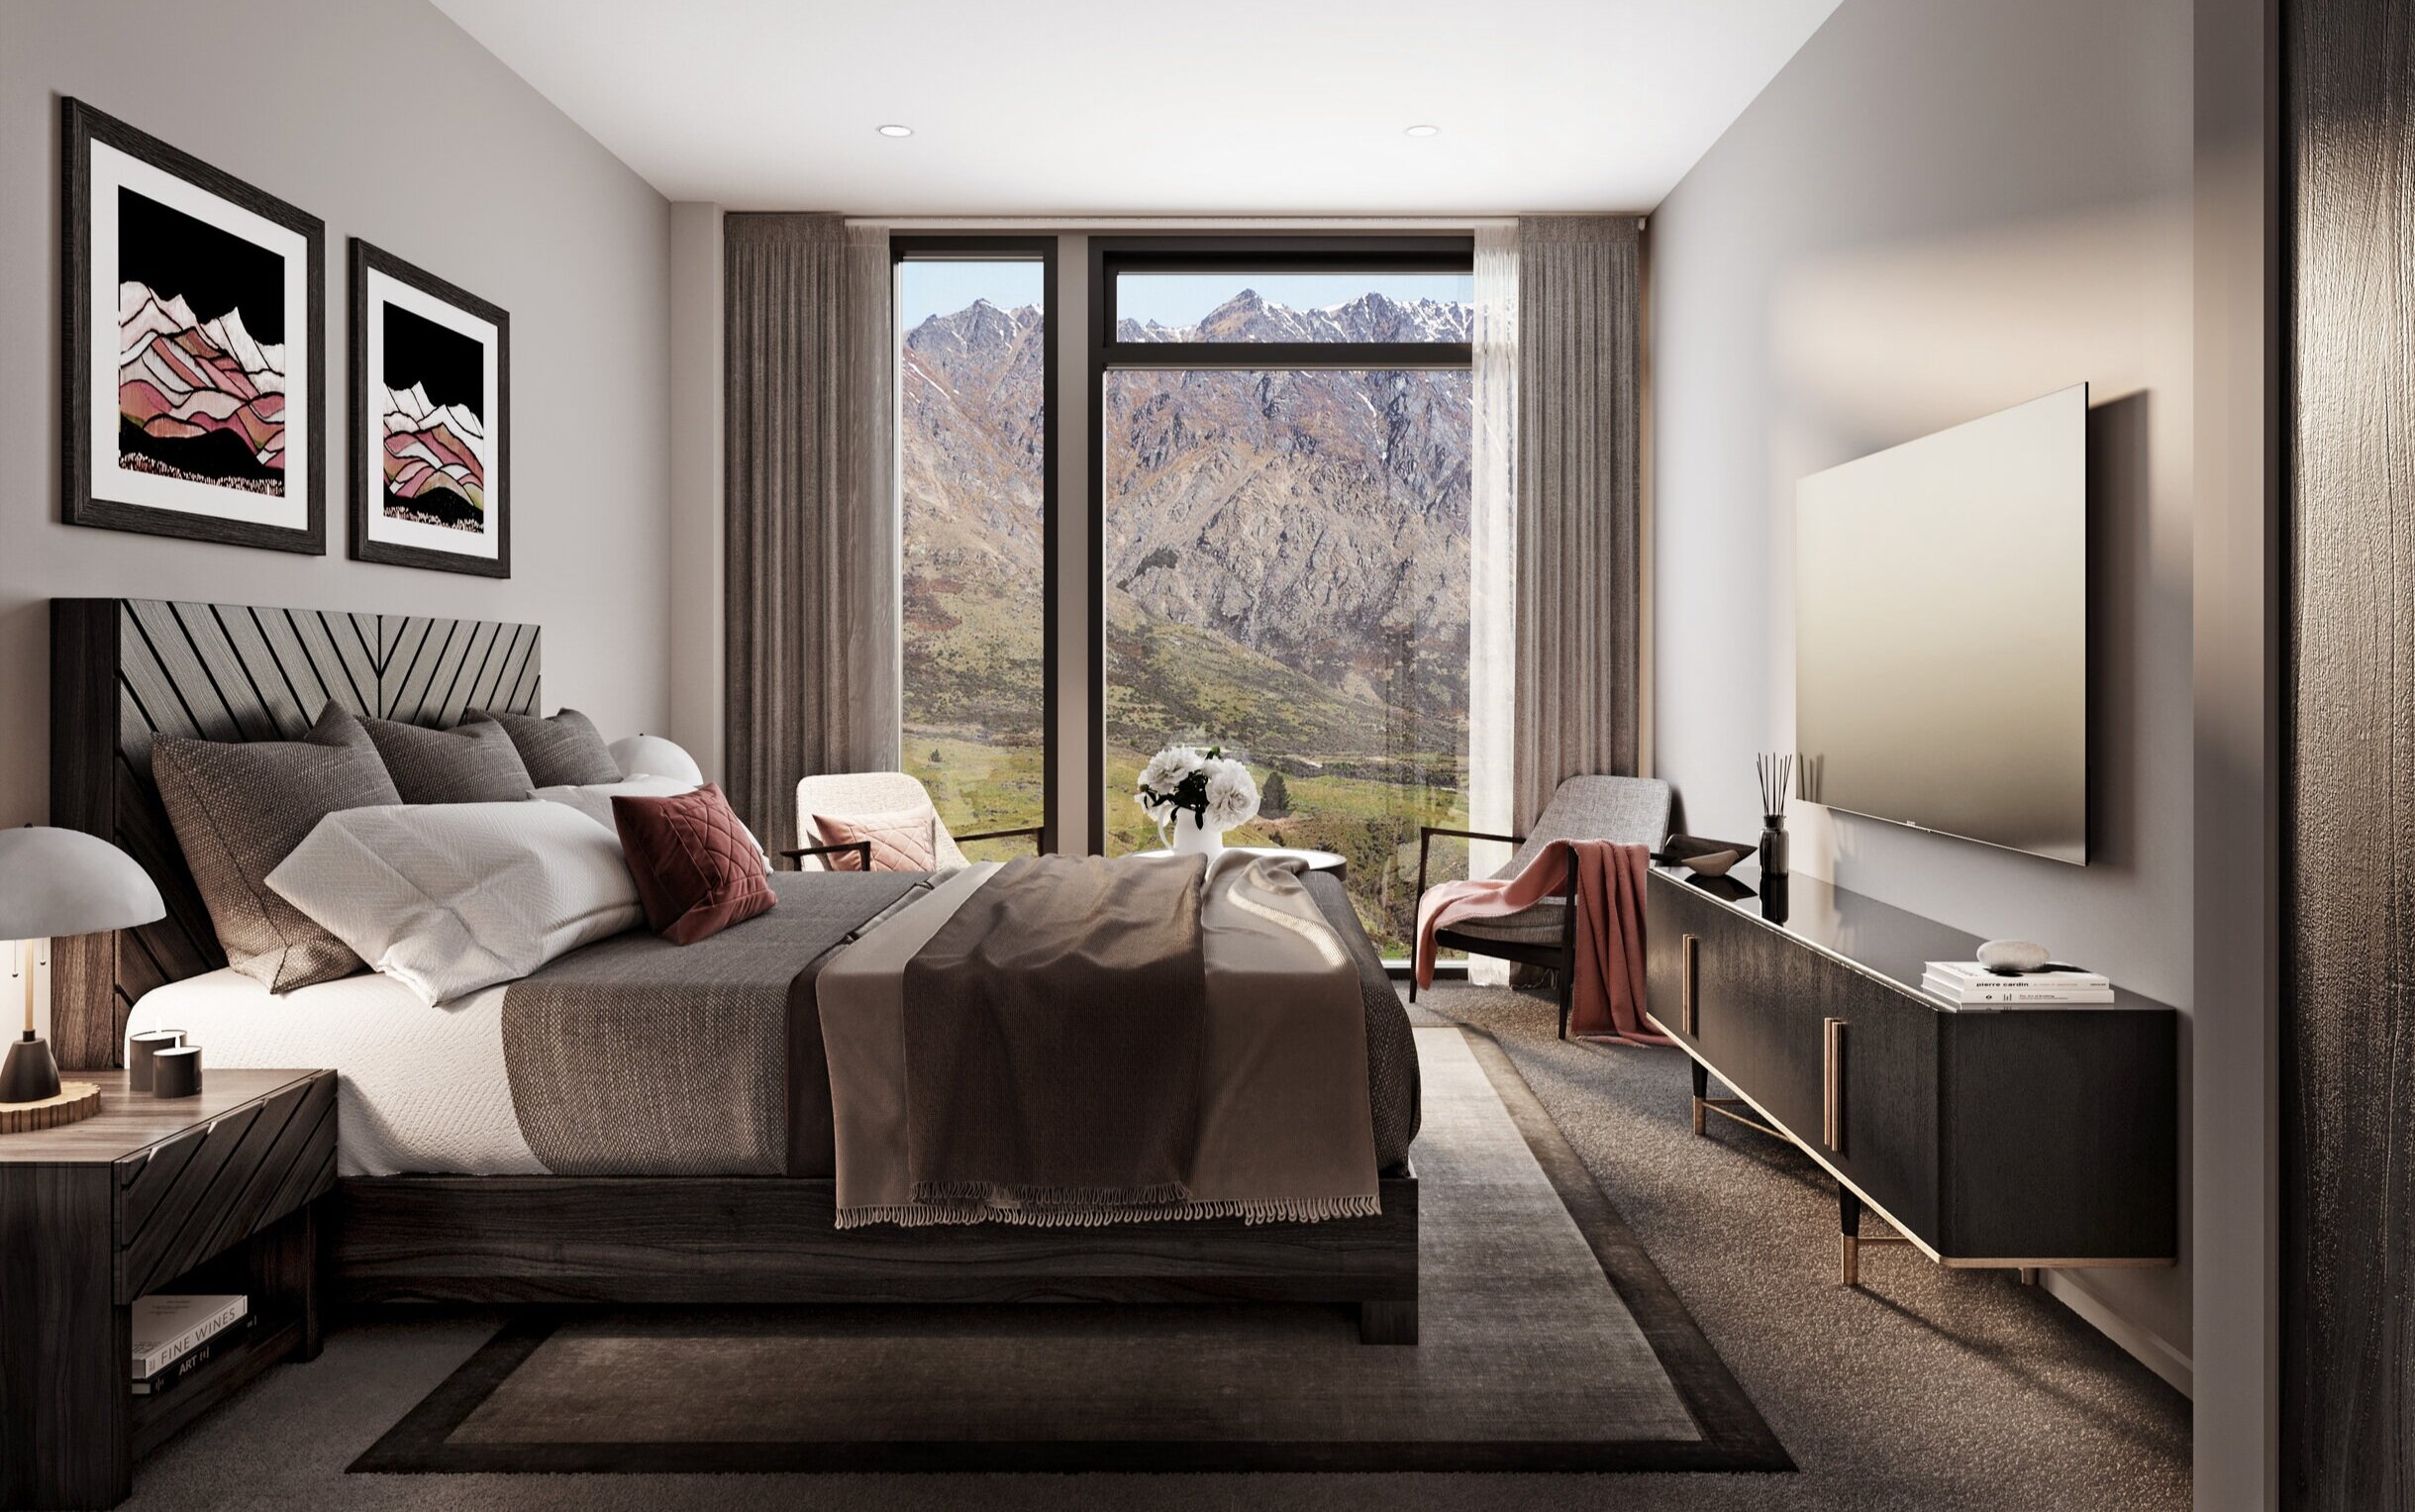 Mason%26Wales-Nevis-Building-Queenstown-Residential-Contemporary-203.jpg